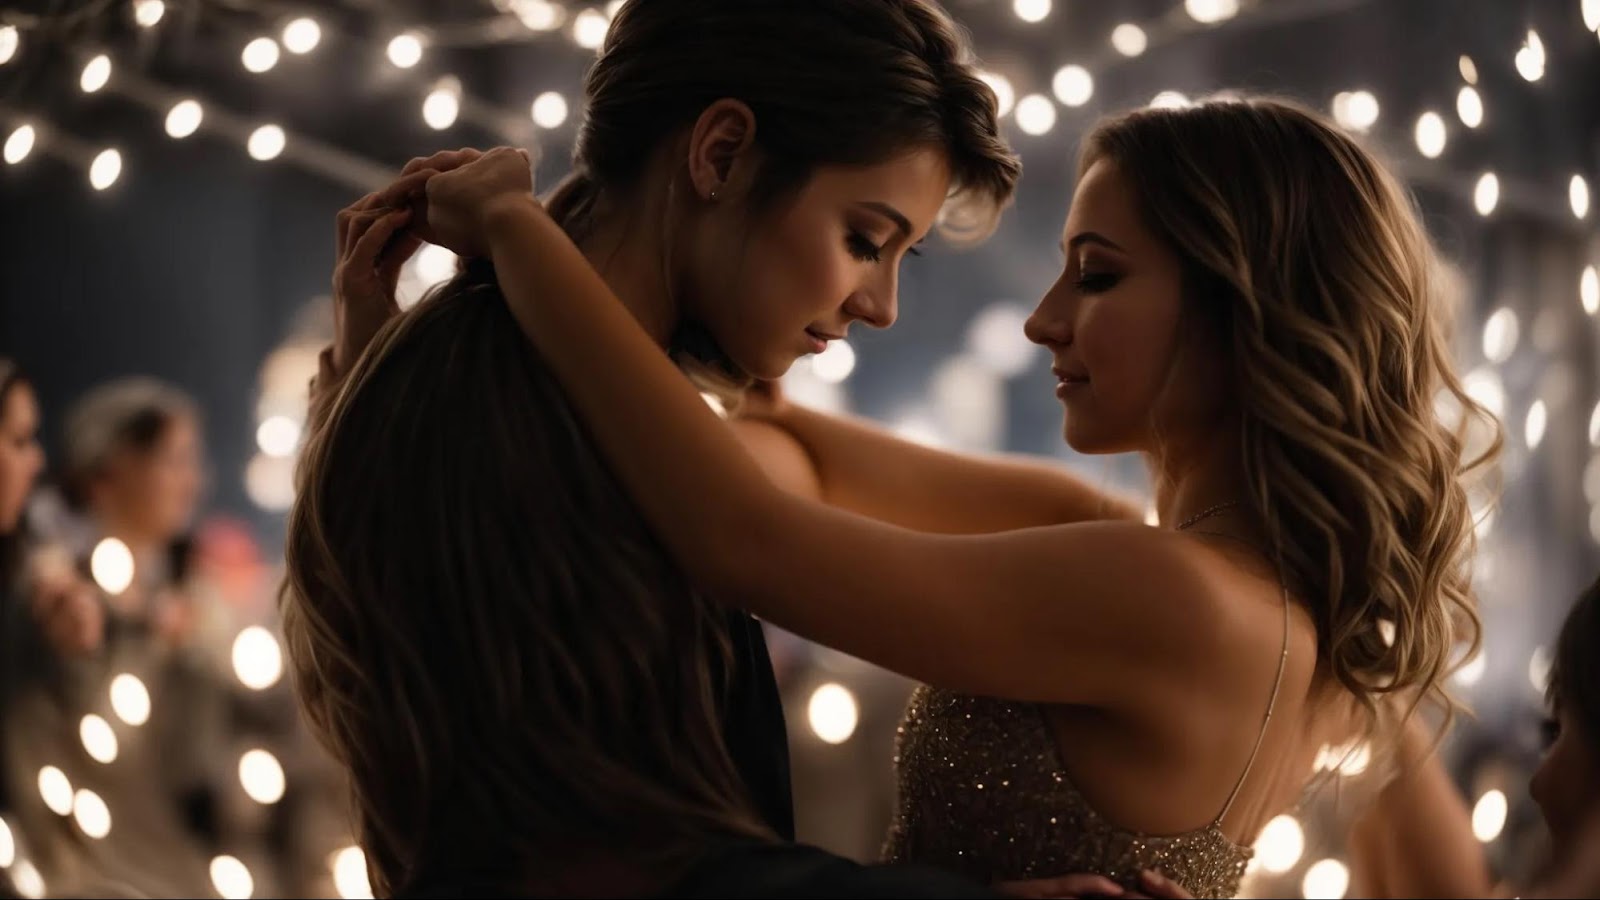 a couple dances closely under soft, twinkling lights, their eyes locked in a moment of pure connection.